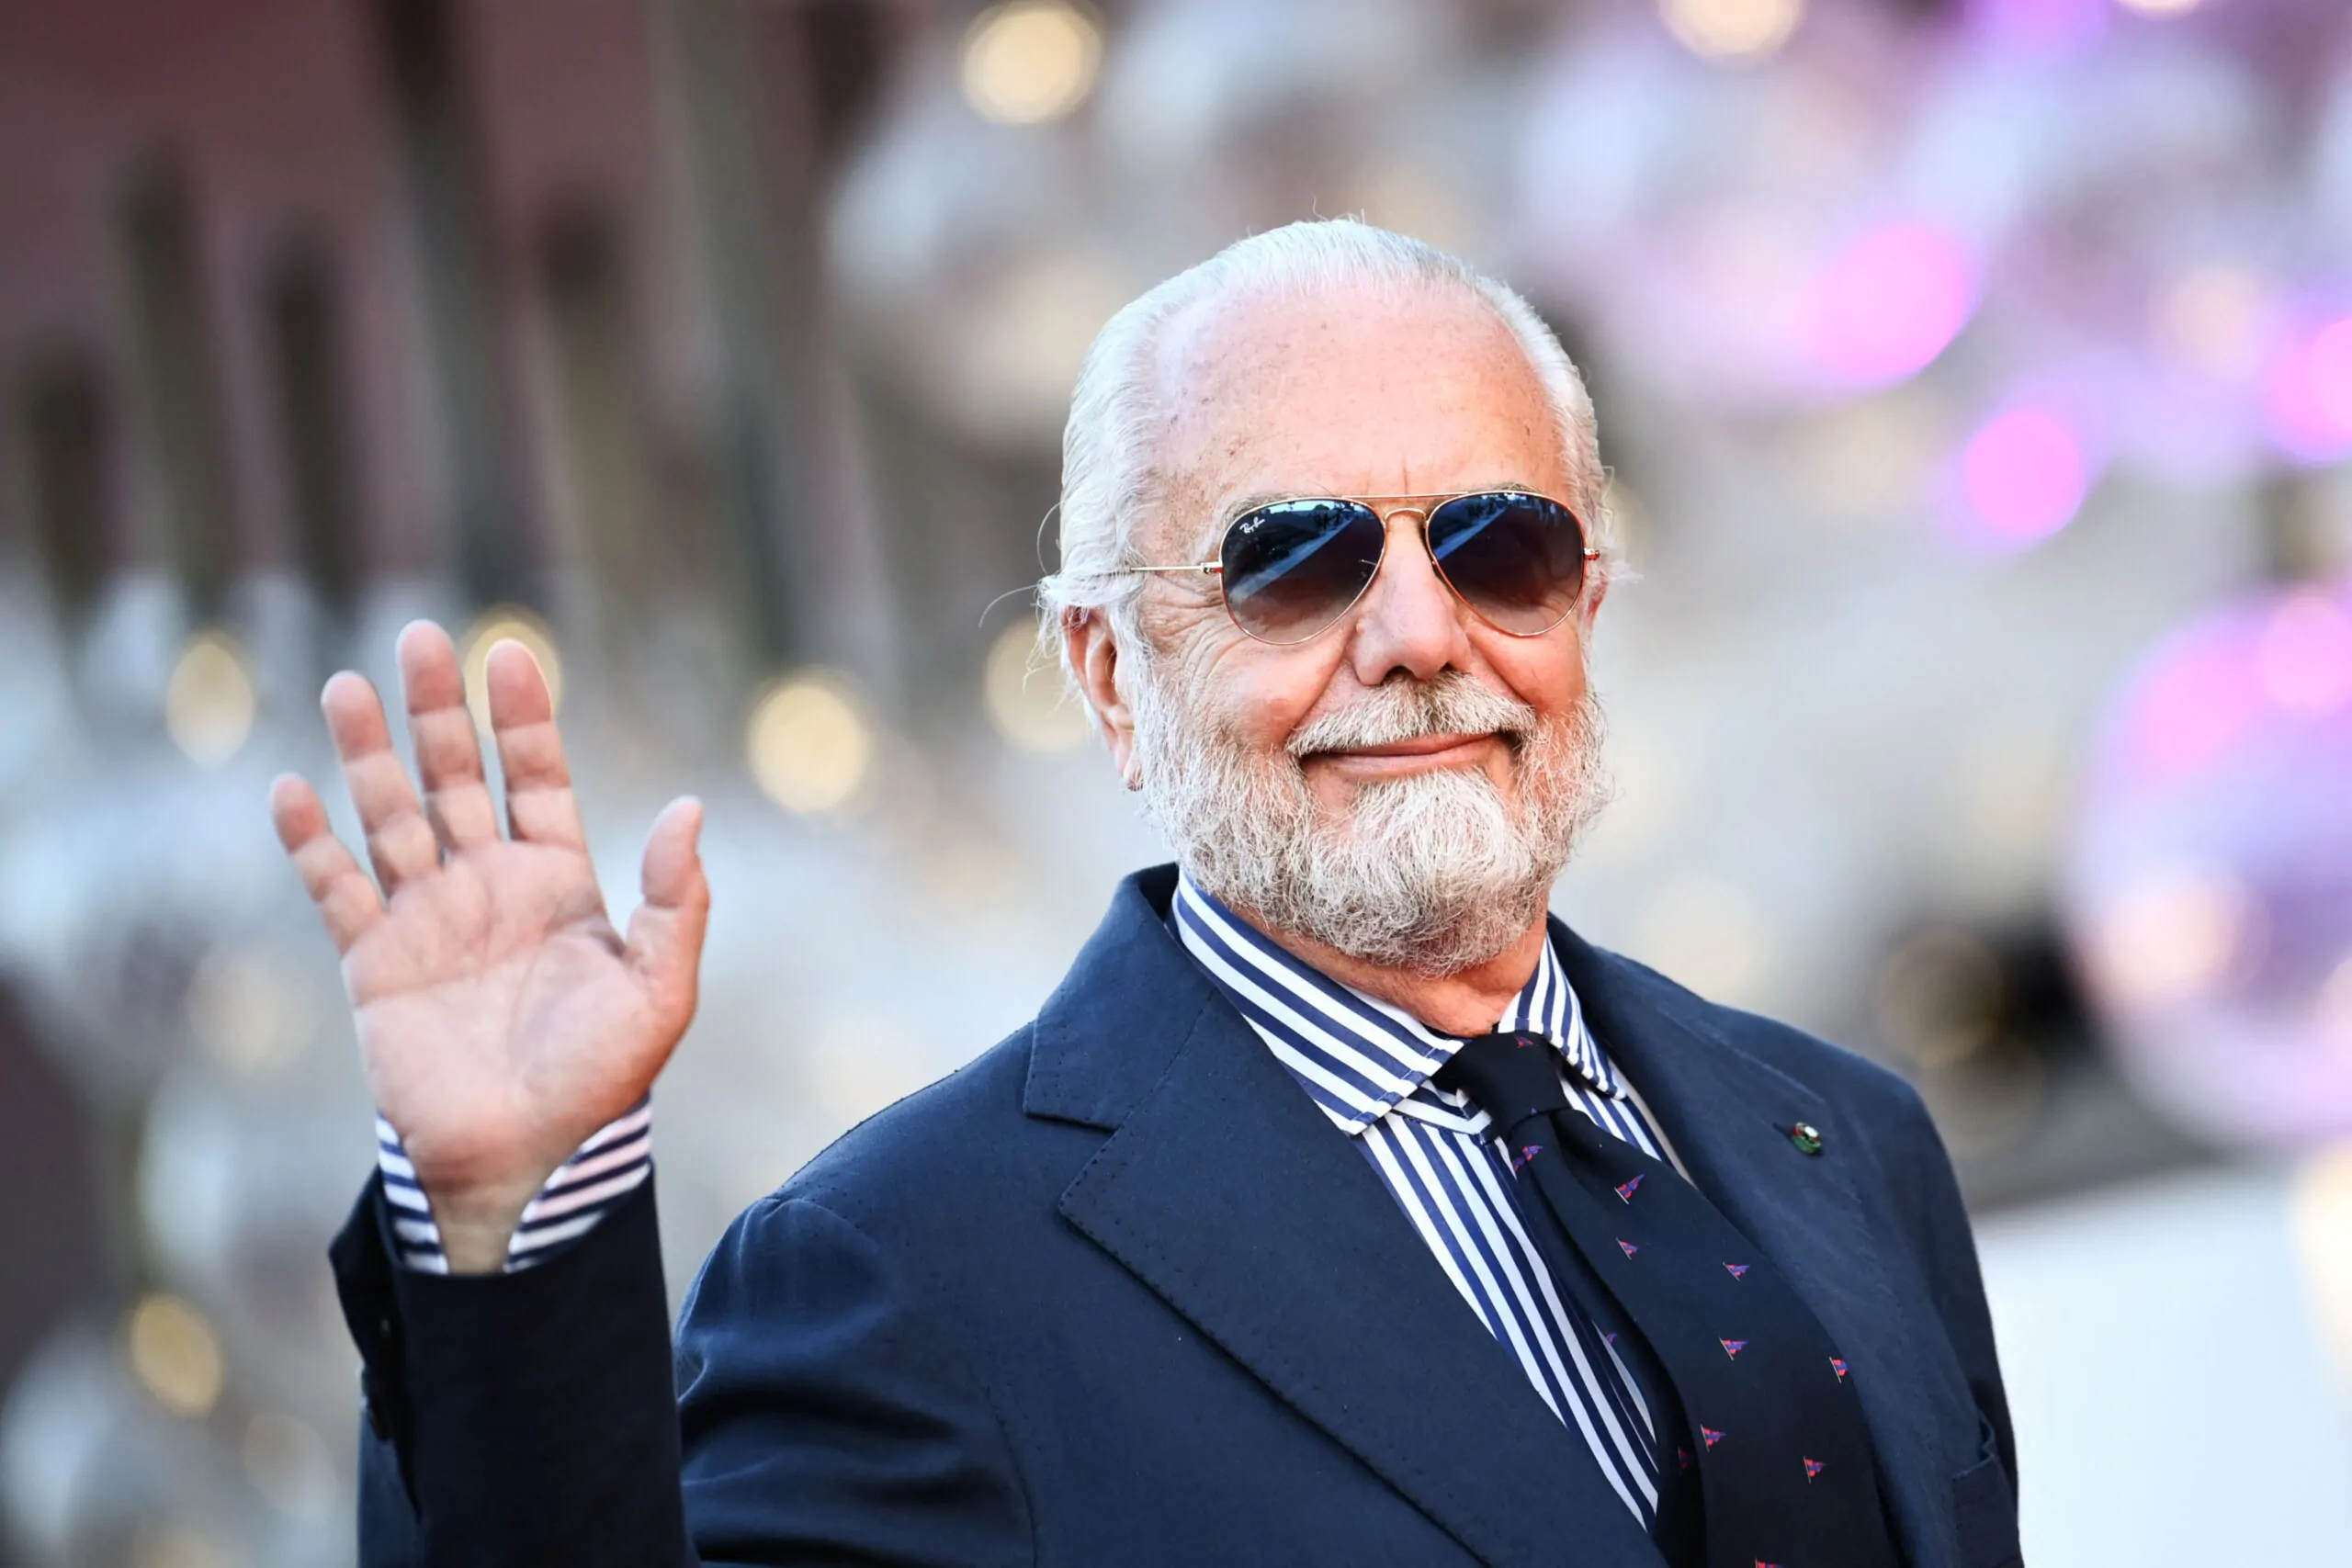 President Aurelio De Laurentiis is inevitably delighted with the early success of his new-look Napoli, which are thriving following a busy summer.